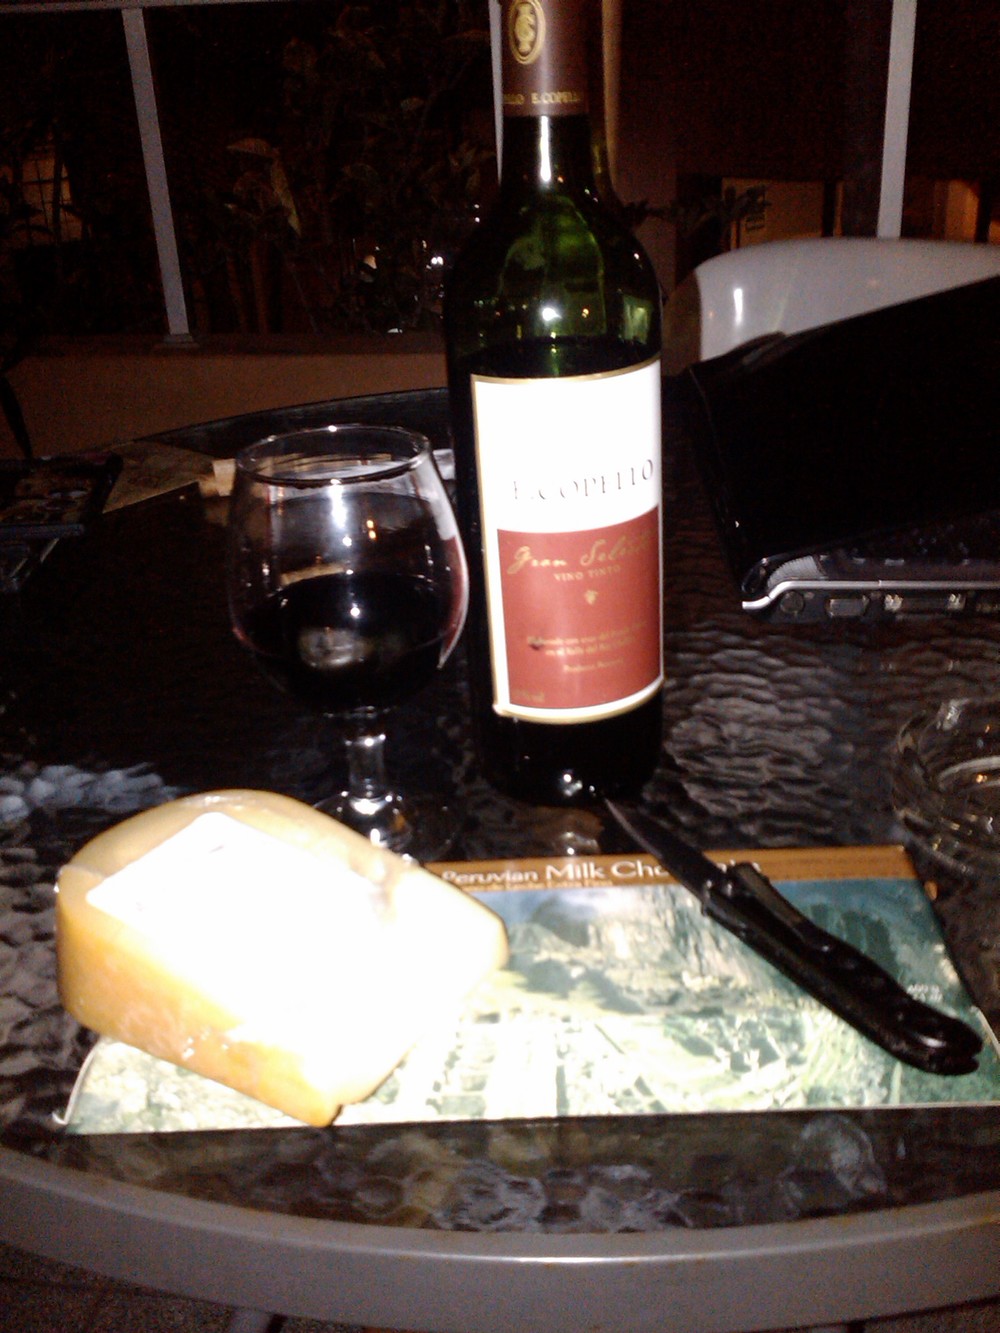  It can be good to unwind with some wine, cheese, chocolate, Cuban cigars and good fellowship 